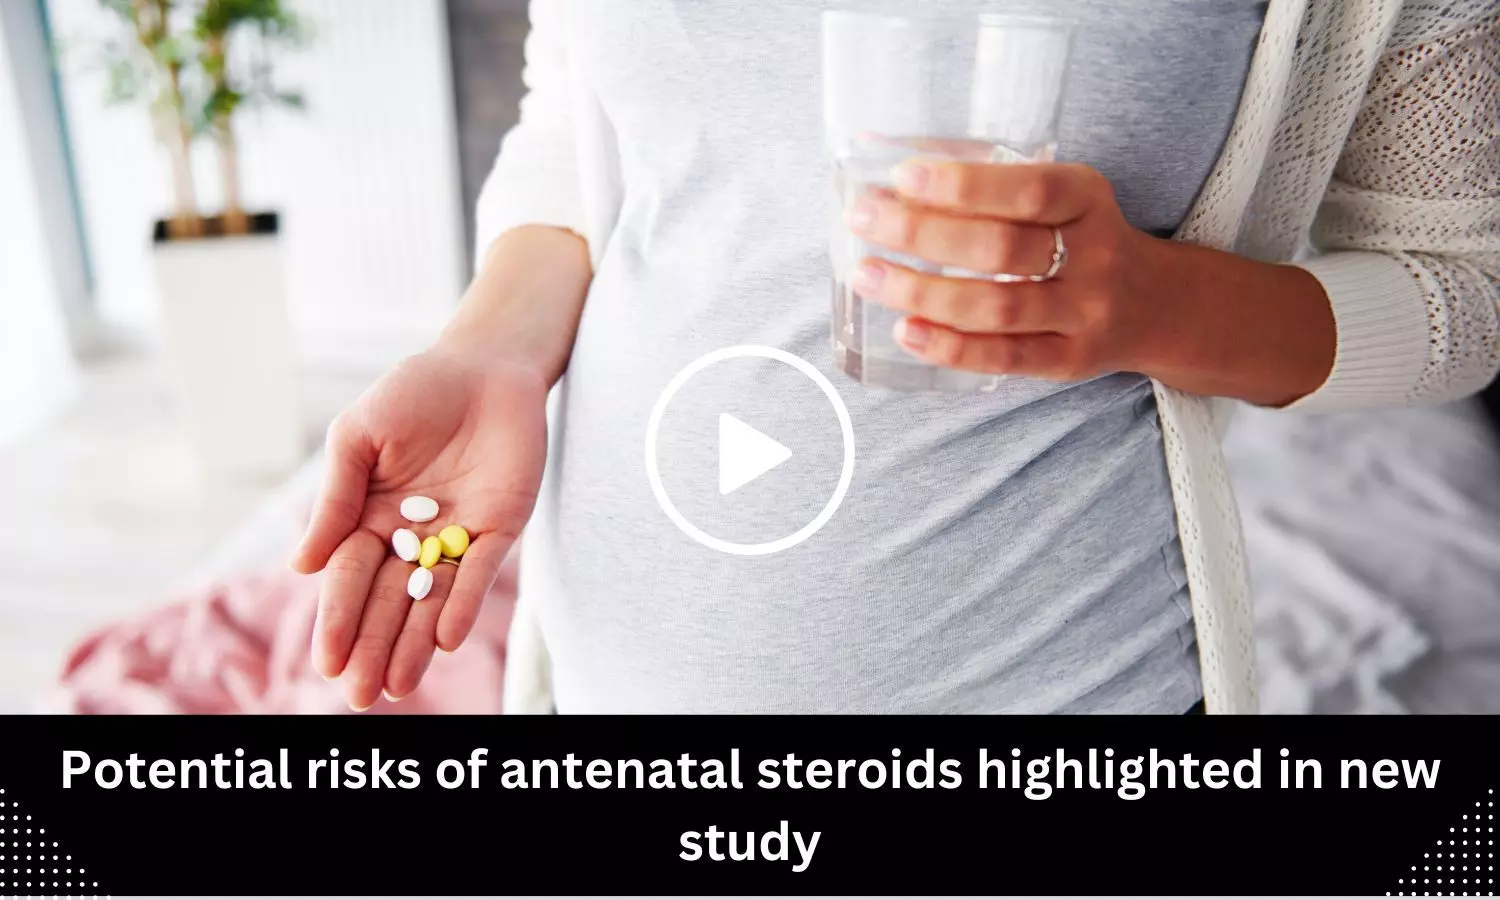 Potential risks of antenatal steroids highlighted in new study